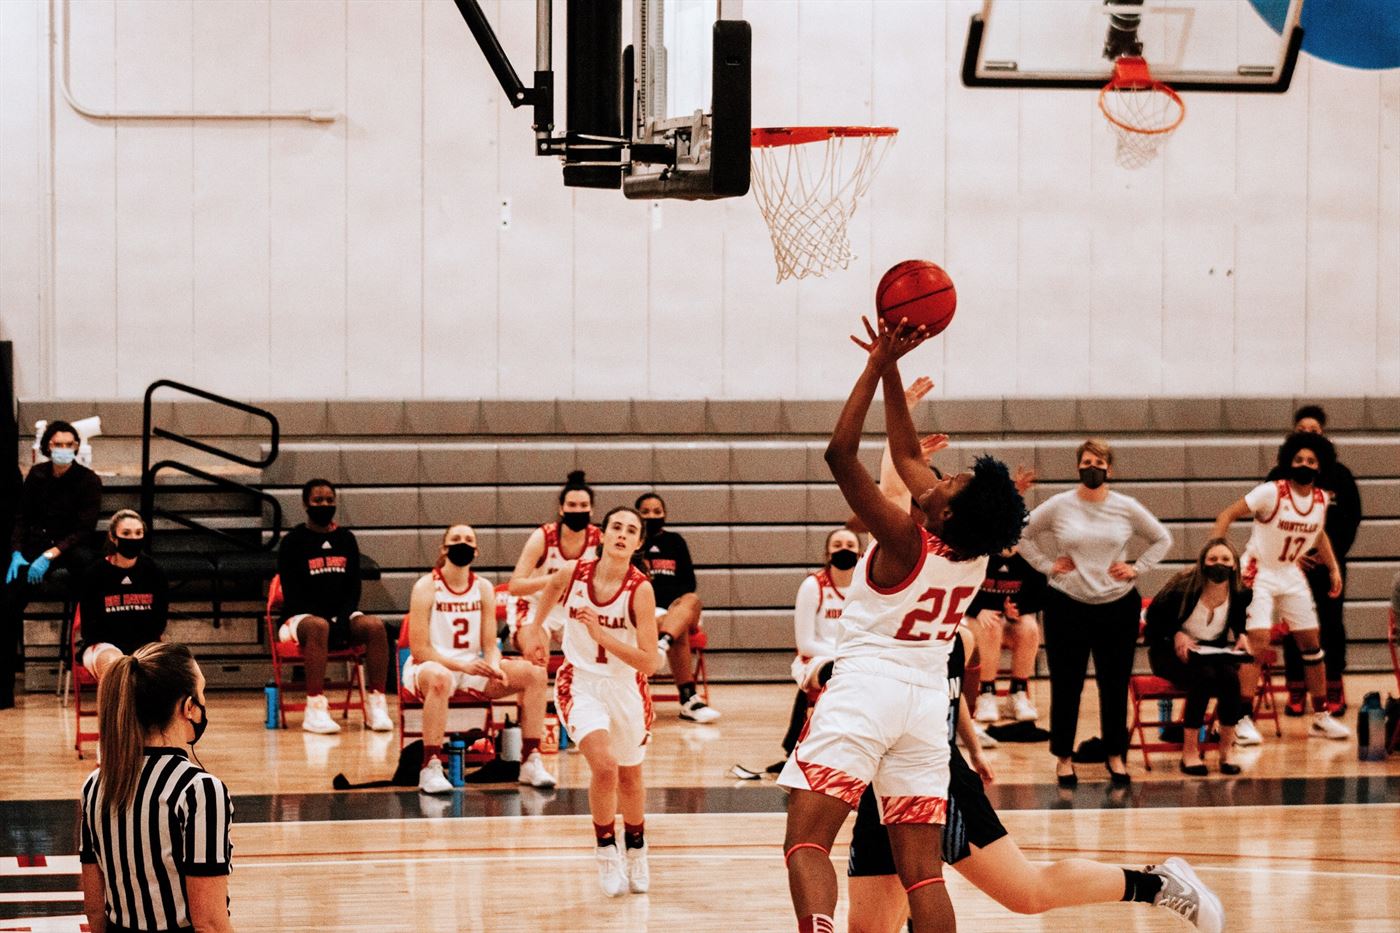 Red Hawks sophomore forward Trinity Stackhouse attempts a layup. Photo courtesy of Julia Radley